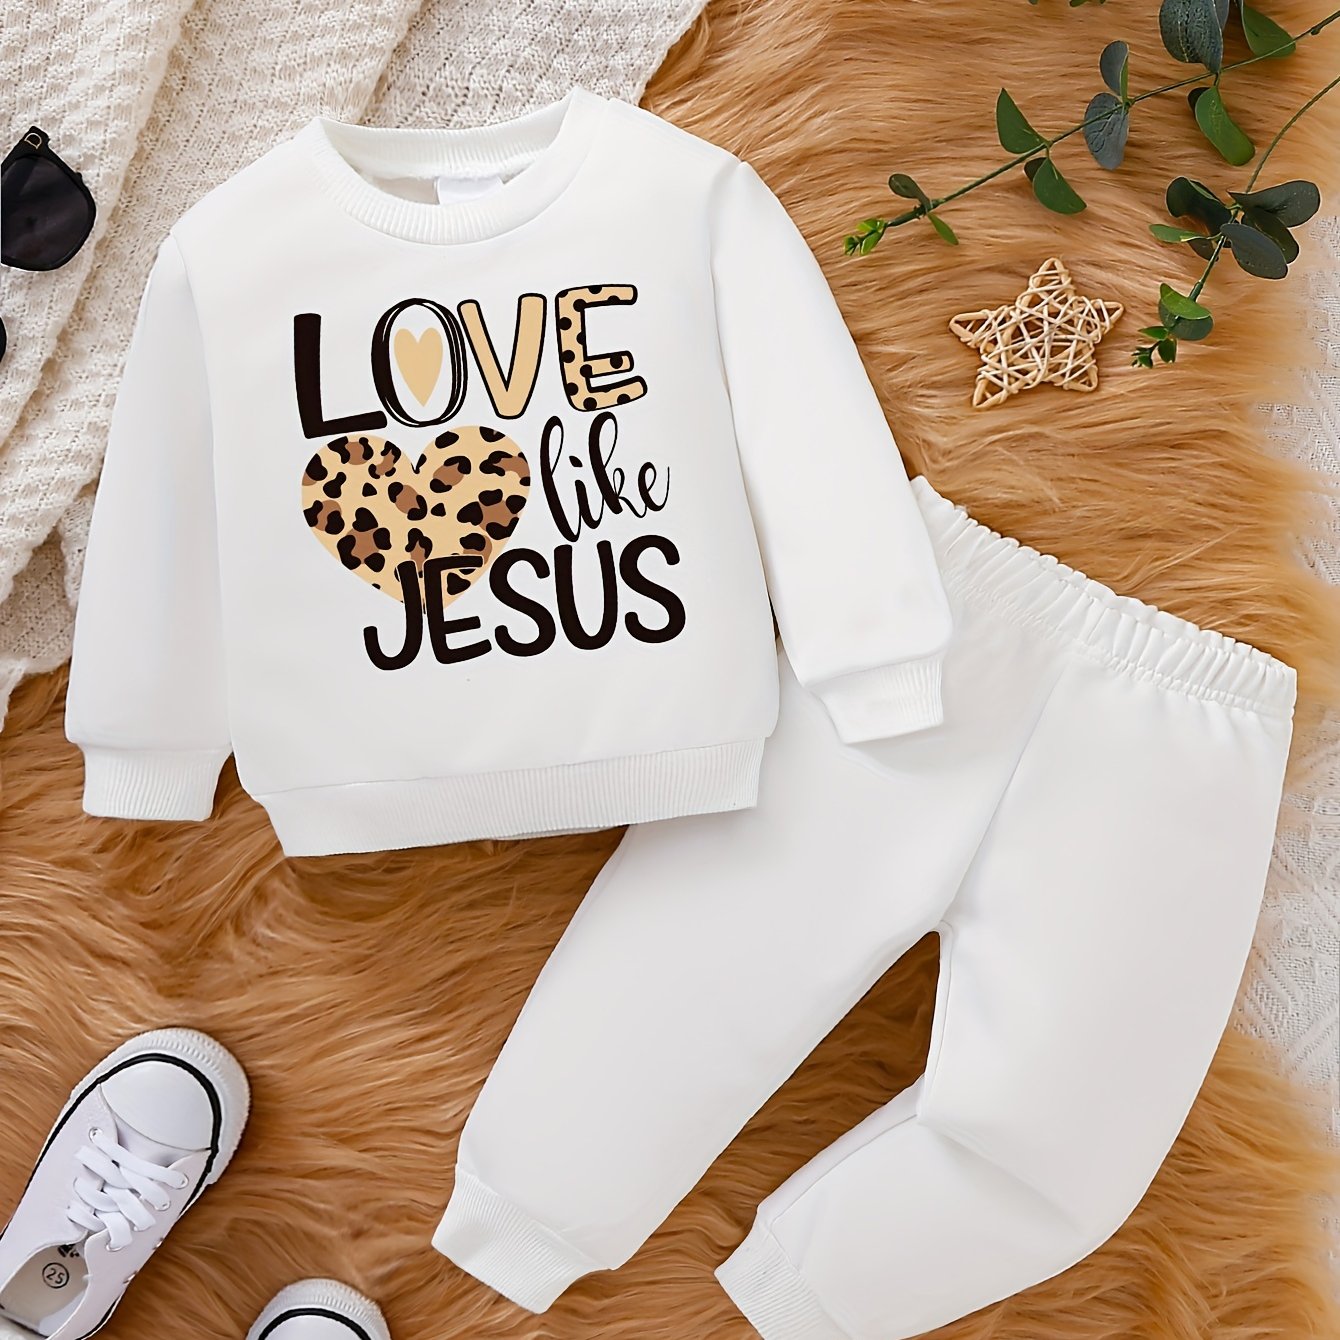 LOVE LIKE JESUS Toddler Christian Casual Outfit claimedbygoddesigns